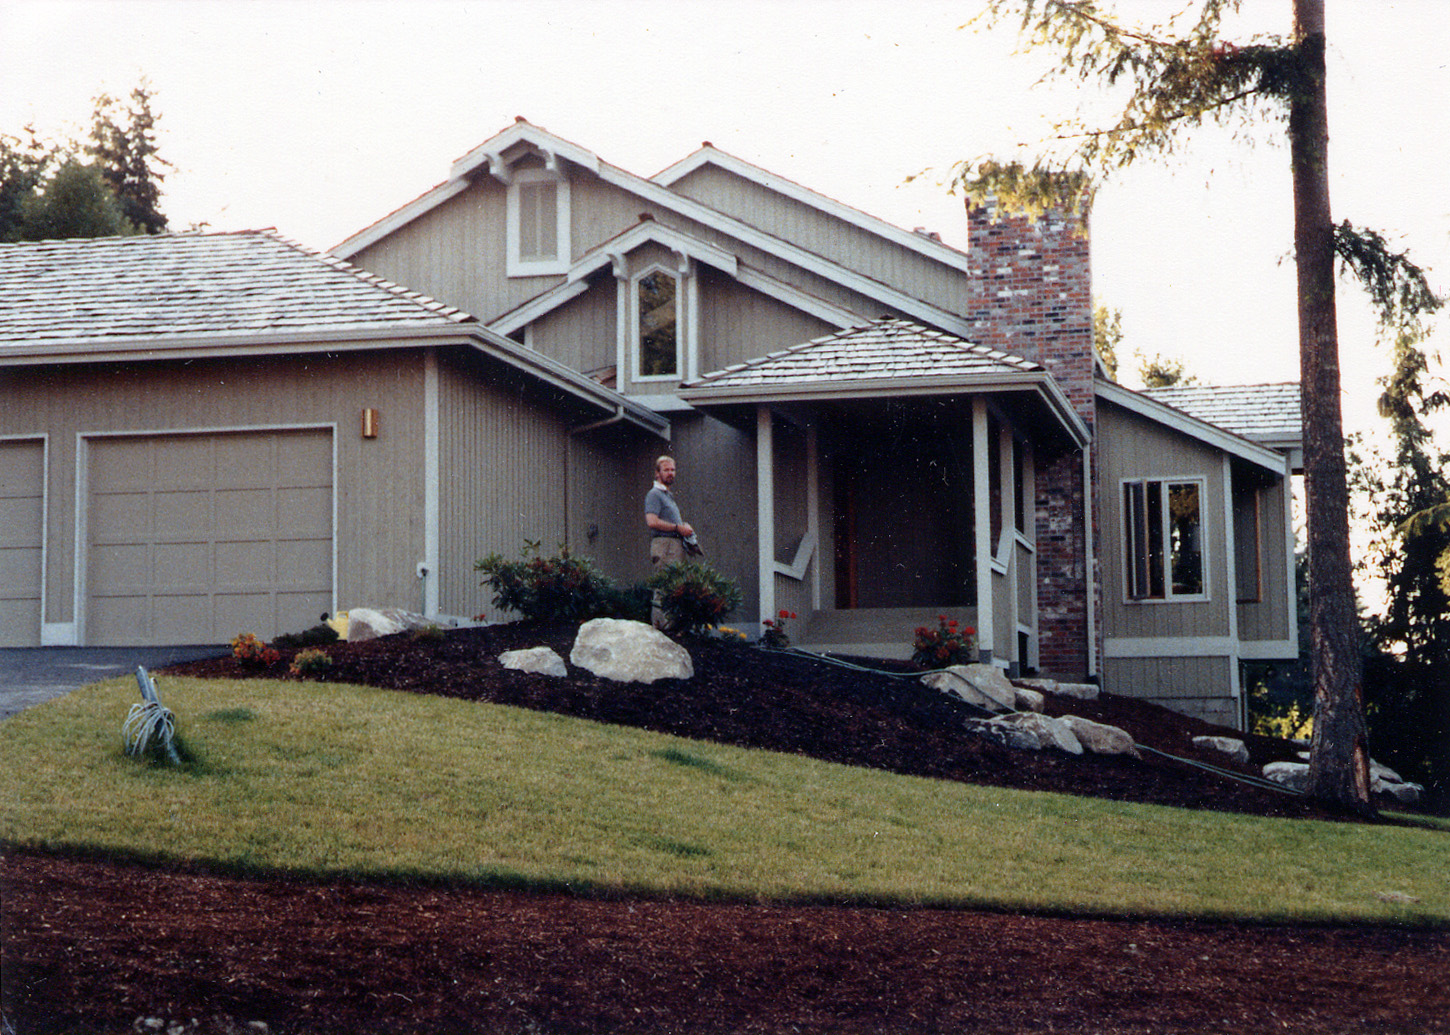 Our old house, but new in April 1984